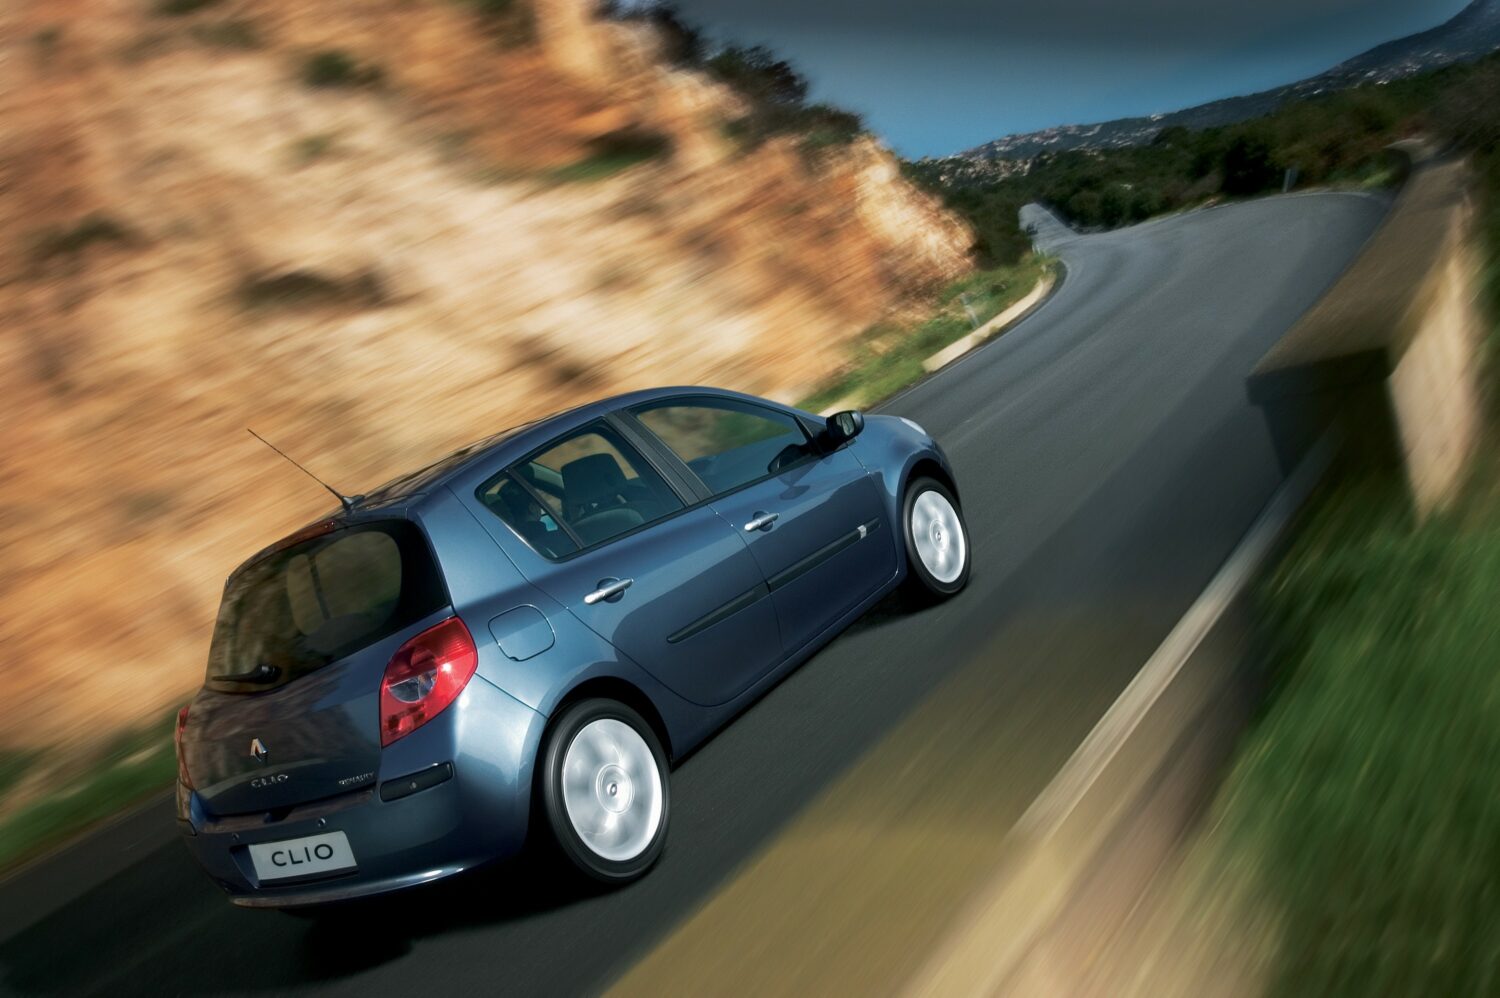 2020 - 30 years of Renault CLIO - Renault CLIO III (2005-2012)